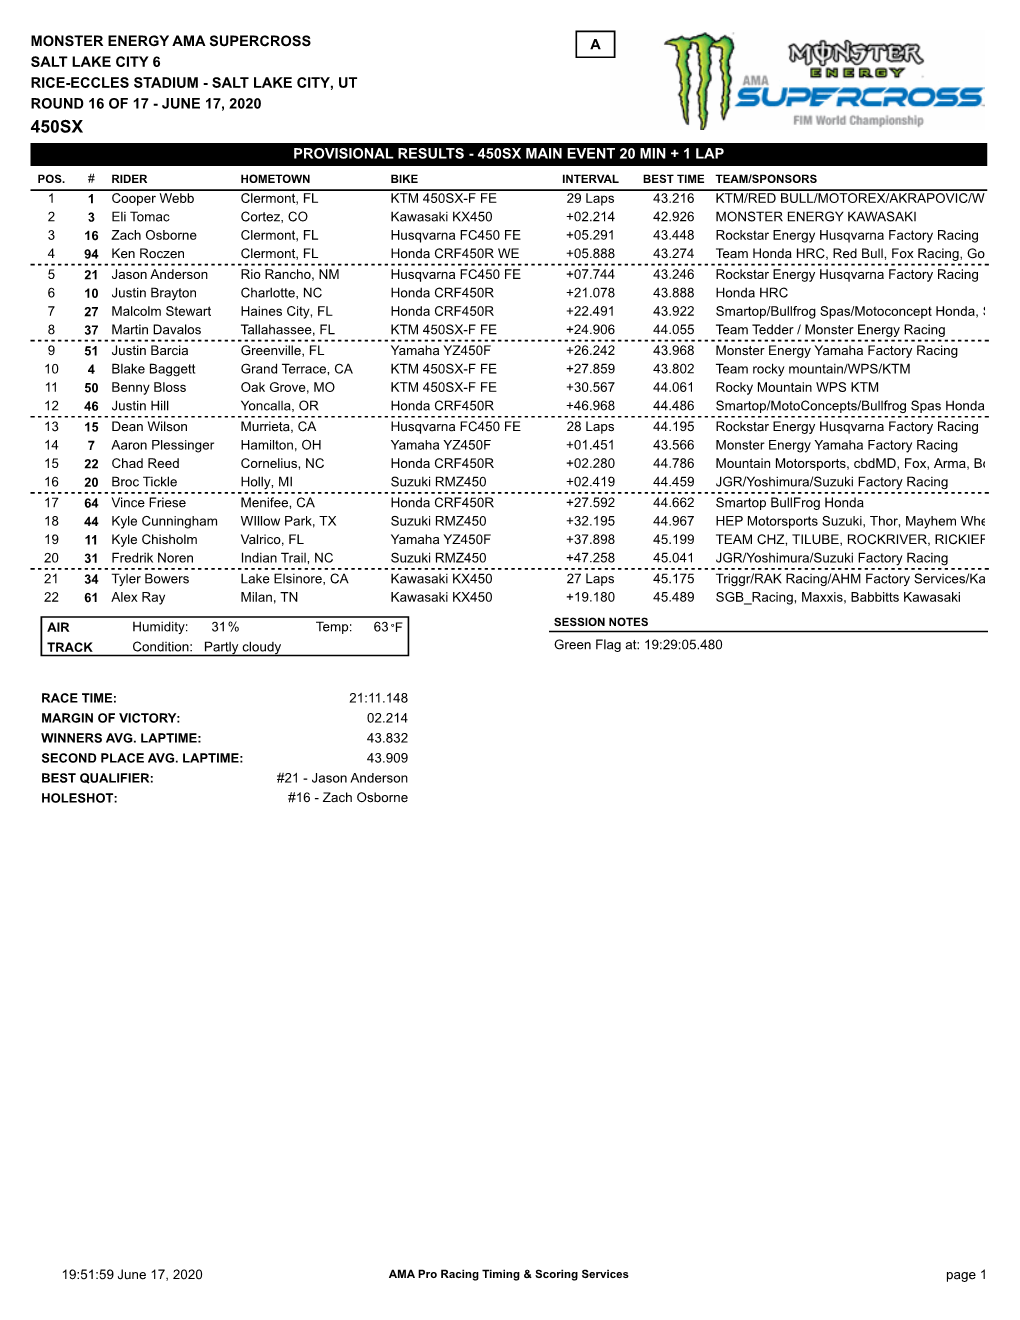 Provisional Results - 450Sx Main Event 20 Min + 1 Lap